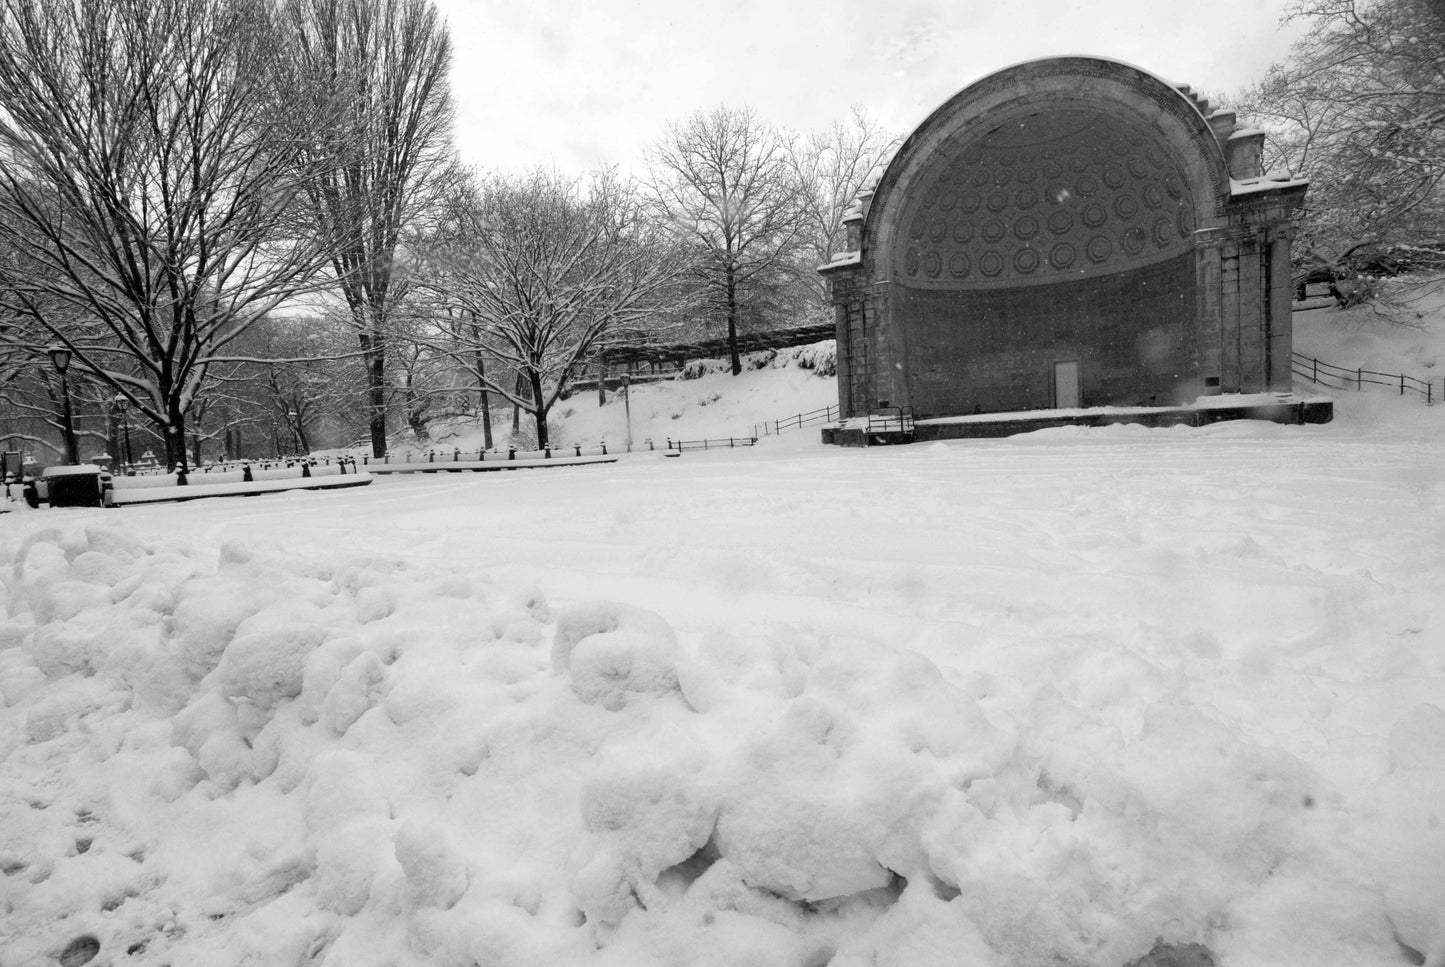 The Naumburg Bandshell is the centerpiece of this winter scene in New Yorks Central Park. Available as an art print or as a photographic print on acrylic glass.